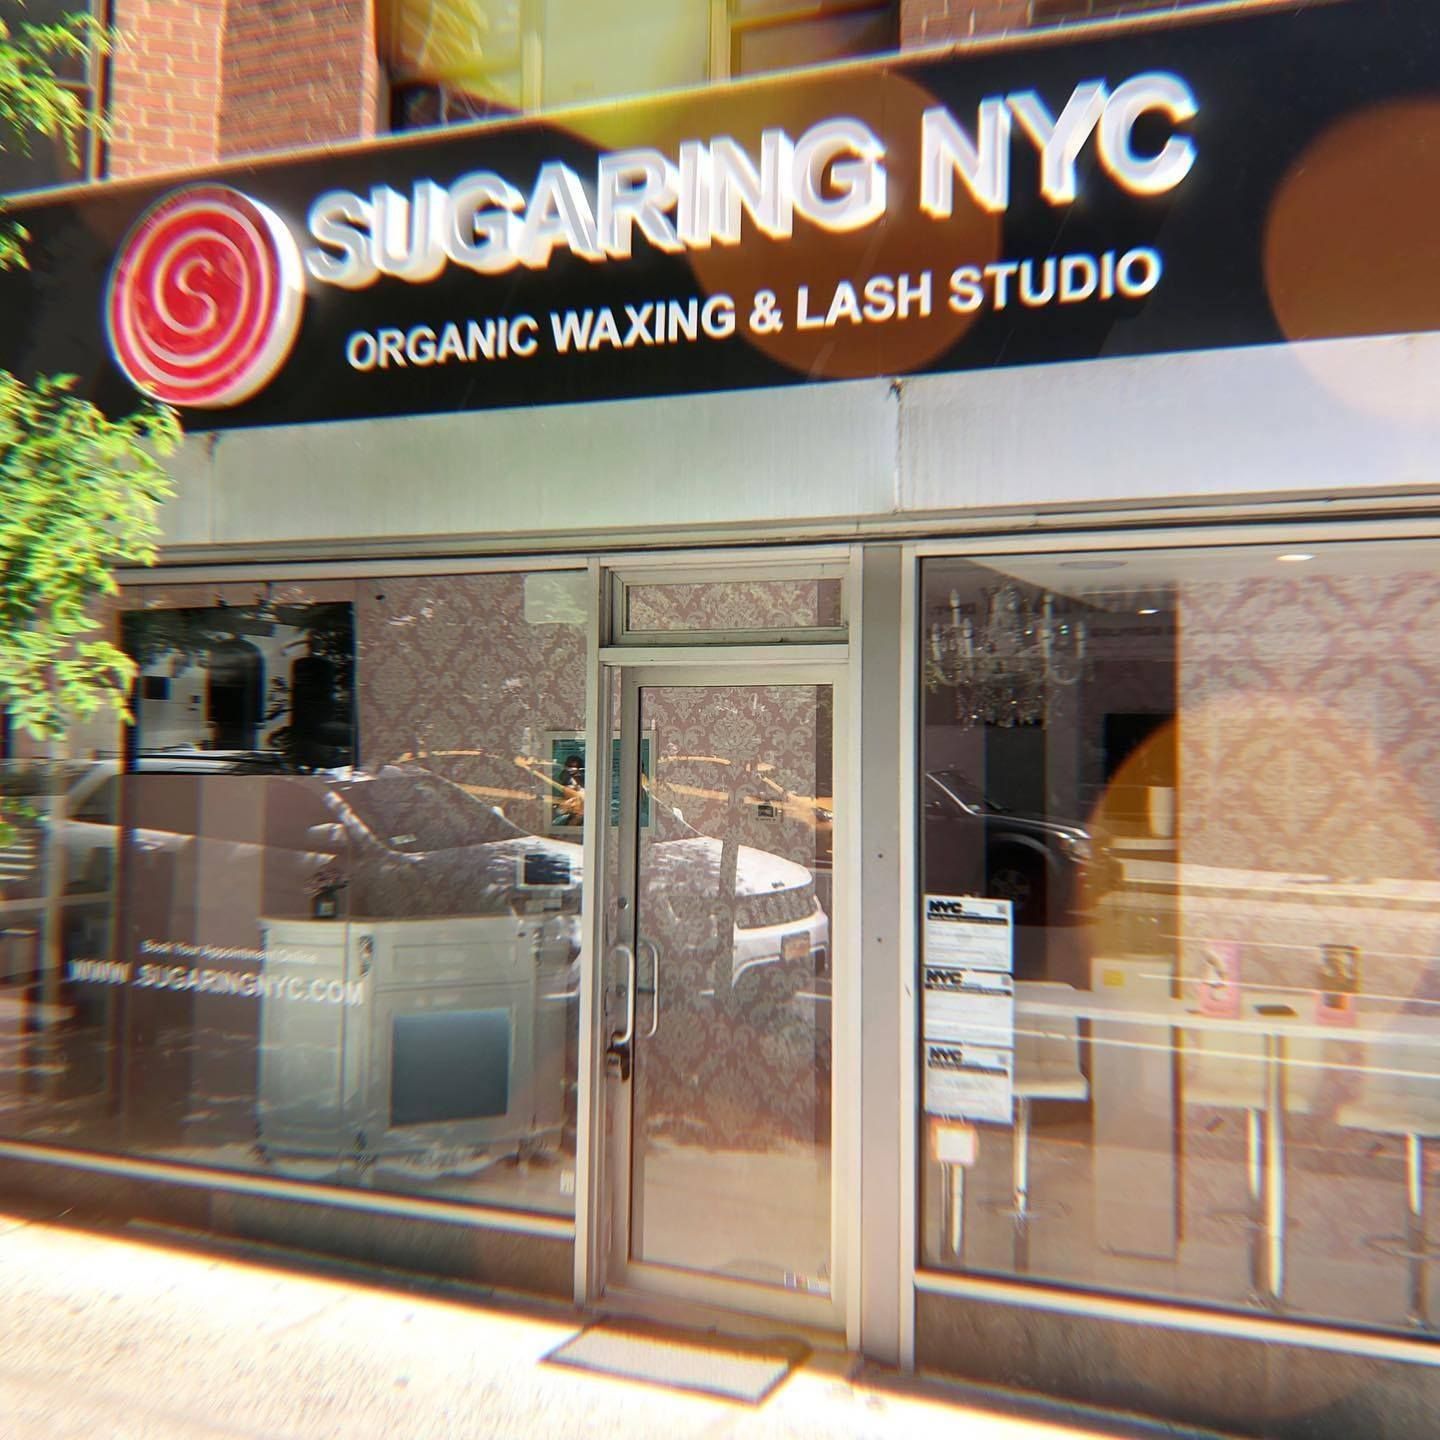 Where would you like to see a Sugaring NYC franchise next